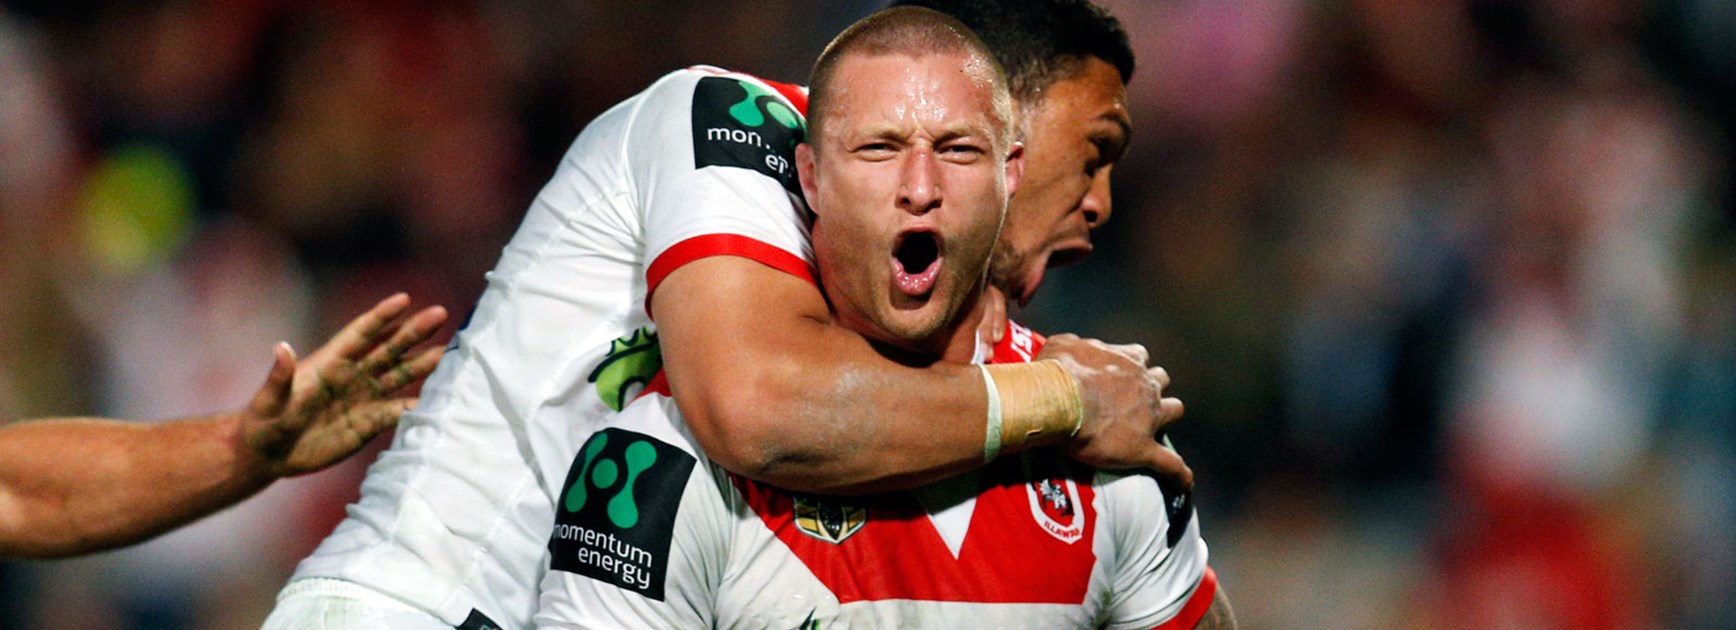 Dragons forward Tariq Sims celebrates one of his two tries against the Sharks.